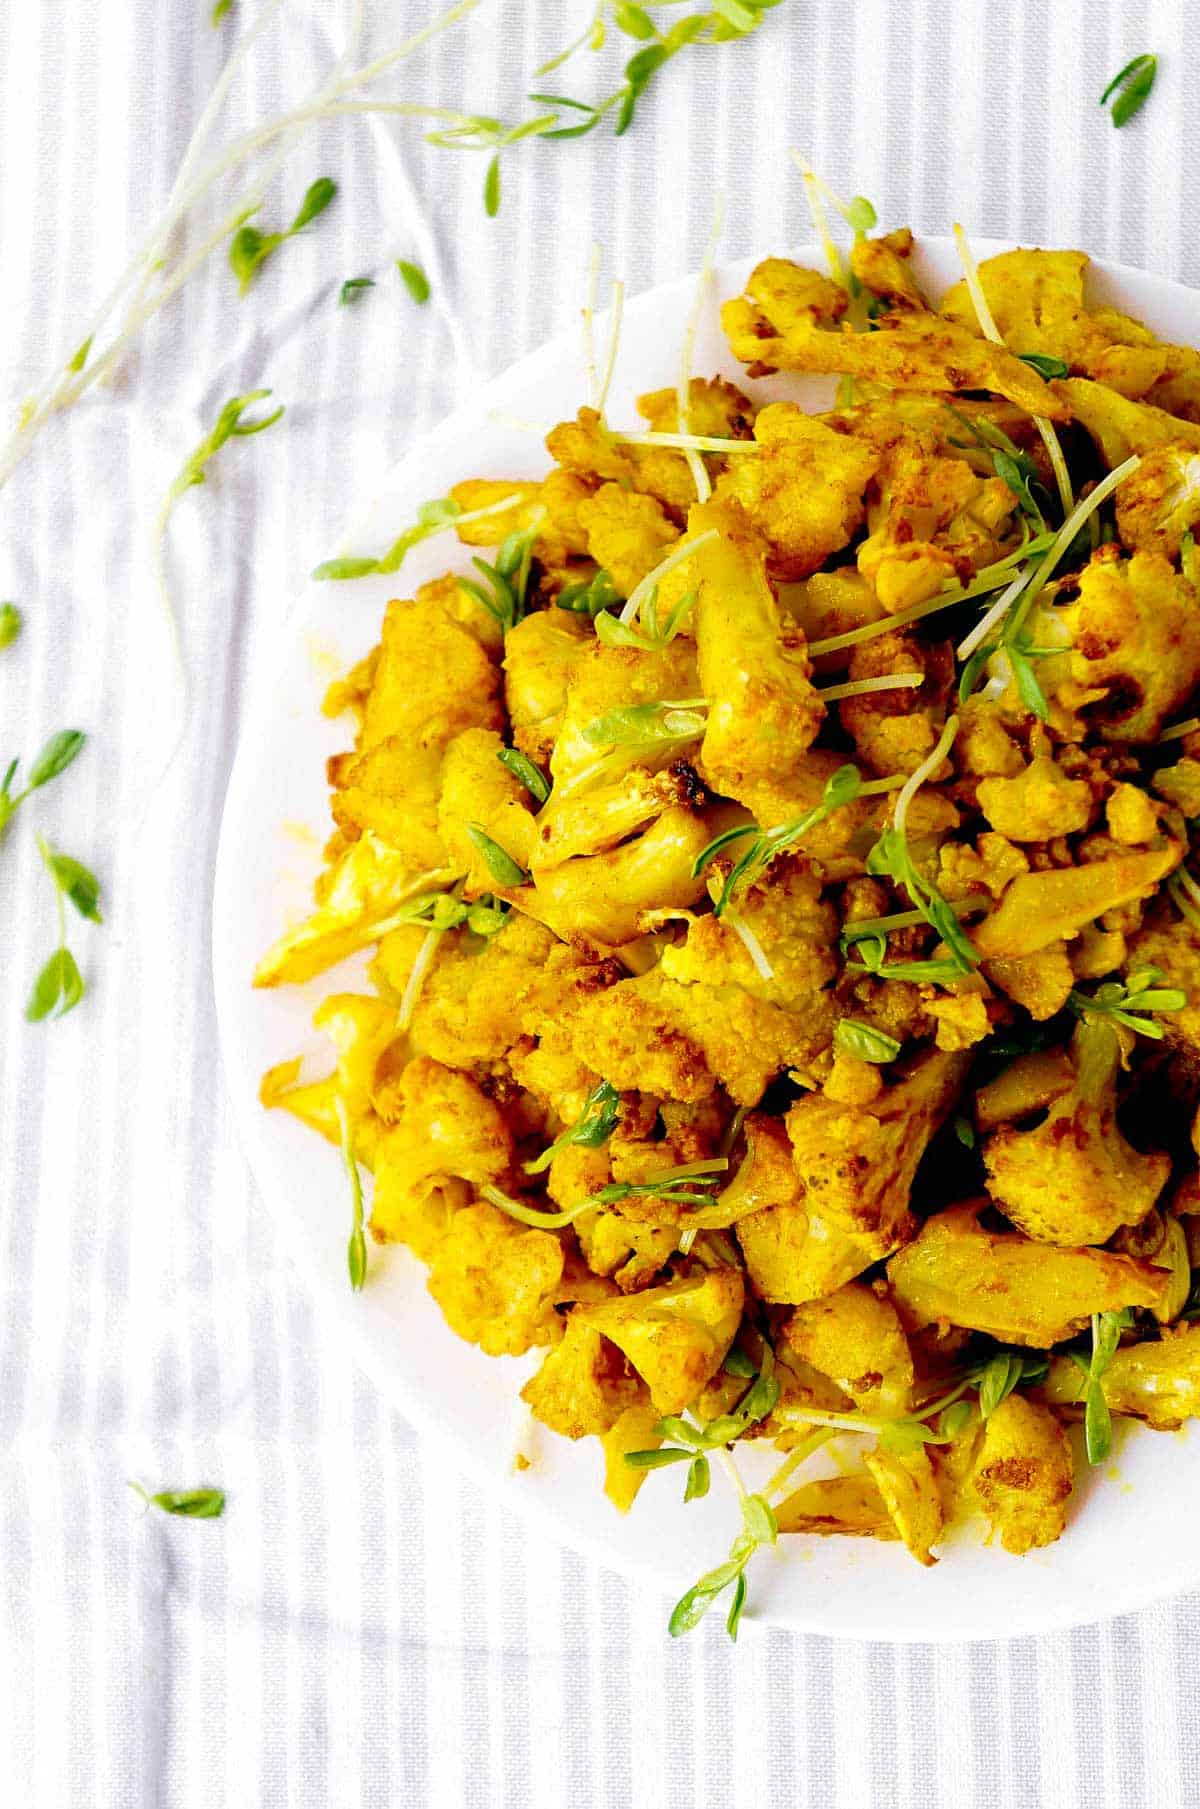 A plate of turmeric cauliflower topped with micro greens.